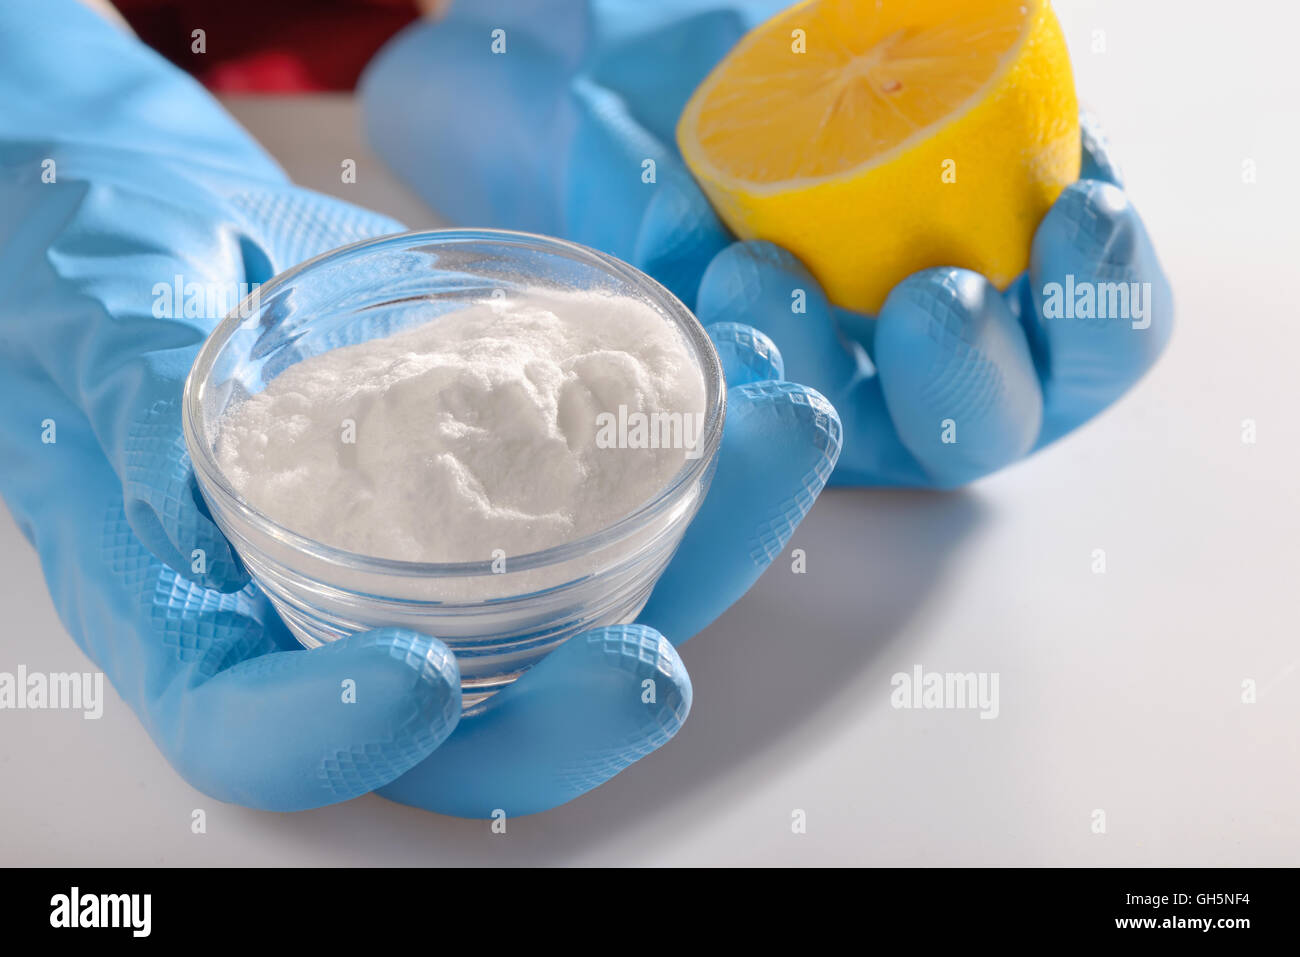 cleaning tools and sodium bicarbonate for house cleaning Stock Photo